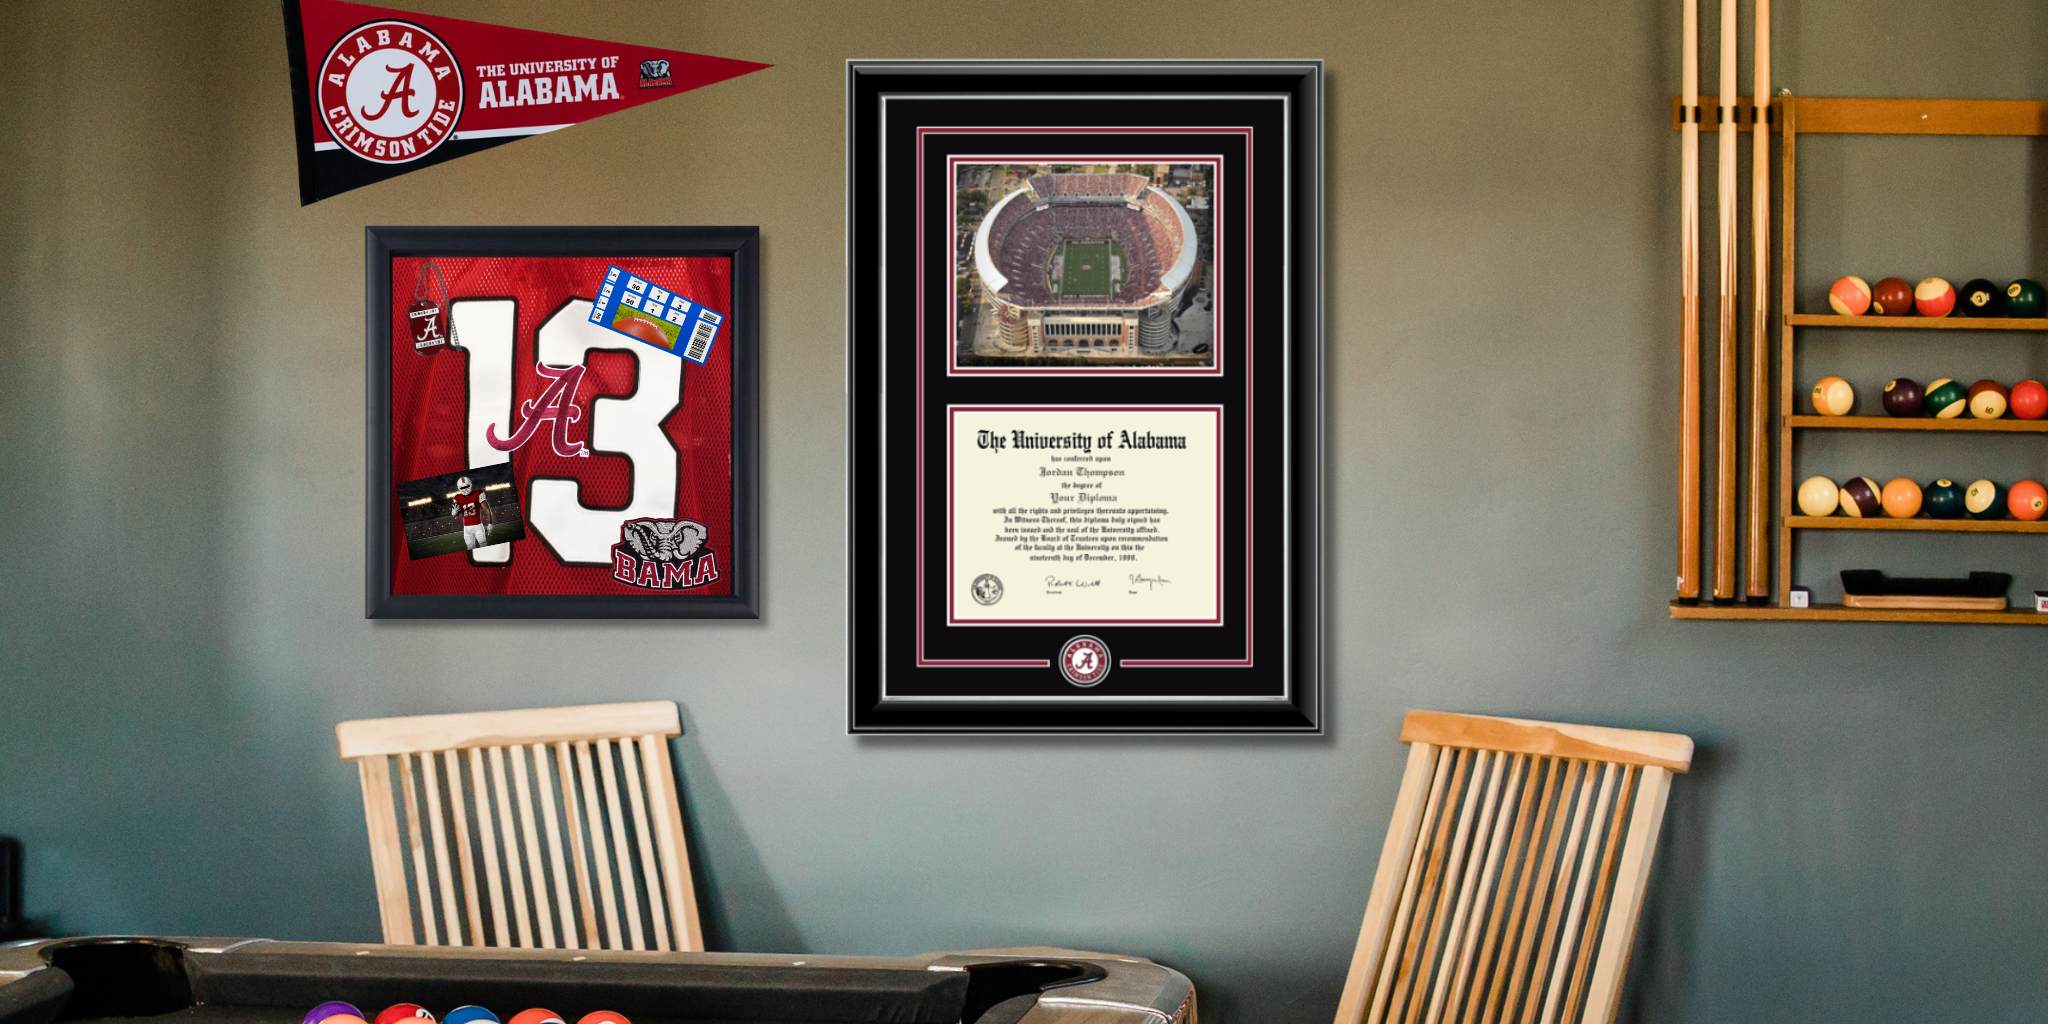 game room with unversity of alabama memorabilia, diploma frame, and shadow box on wall